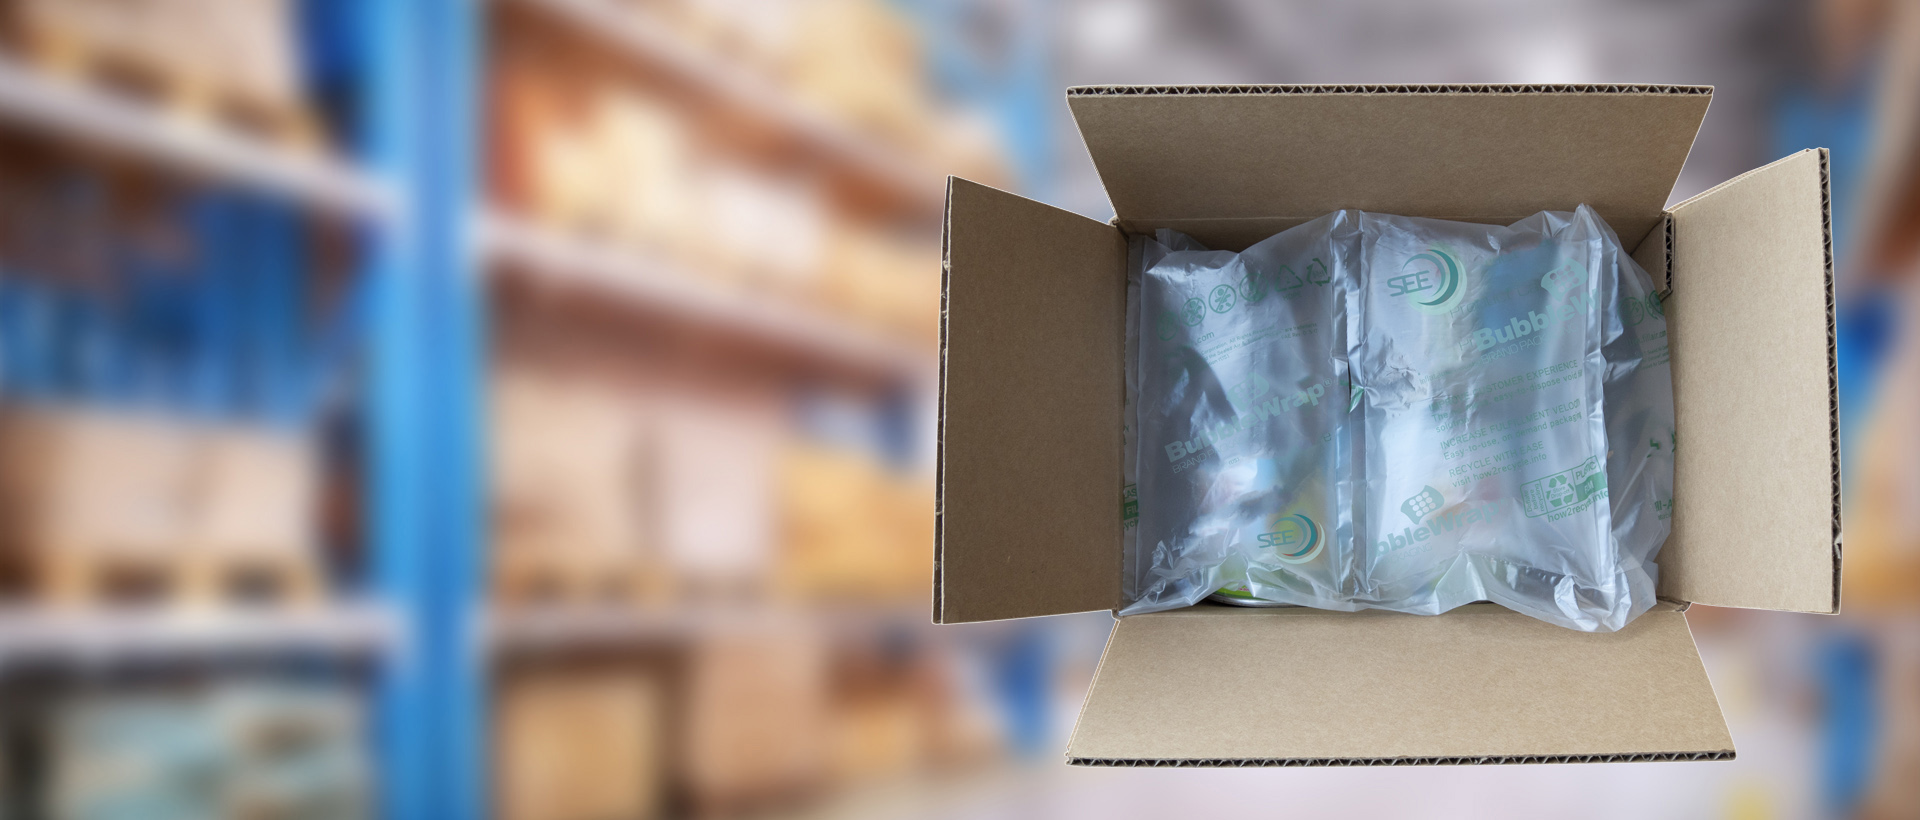 Methdic Air Pillow Air Cushion Maker Packaging Machine DHL UPS SF Express Used for Shipping Protectors Packaging Air Bags Bubble Wrap Black 